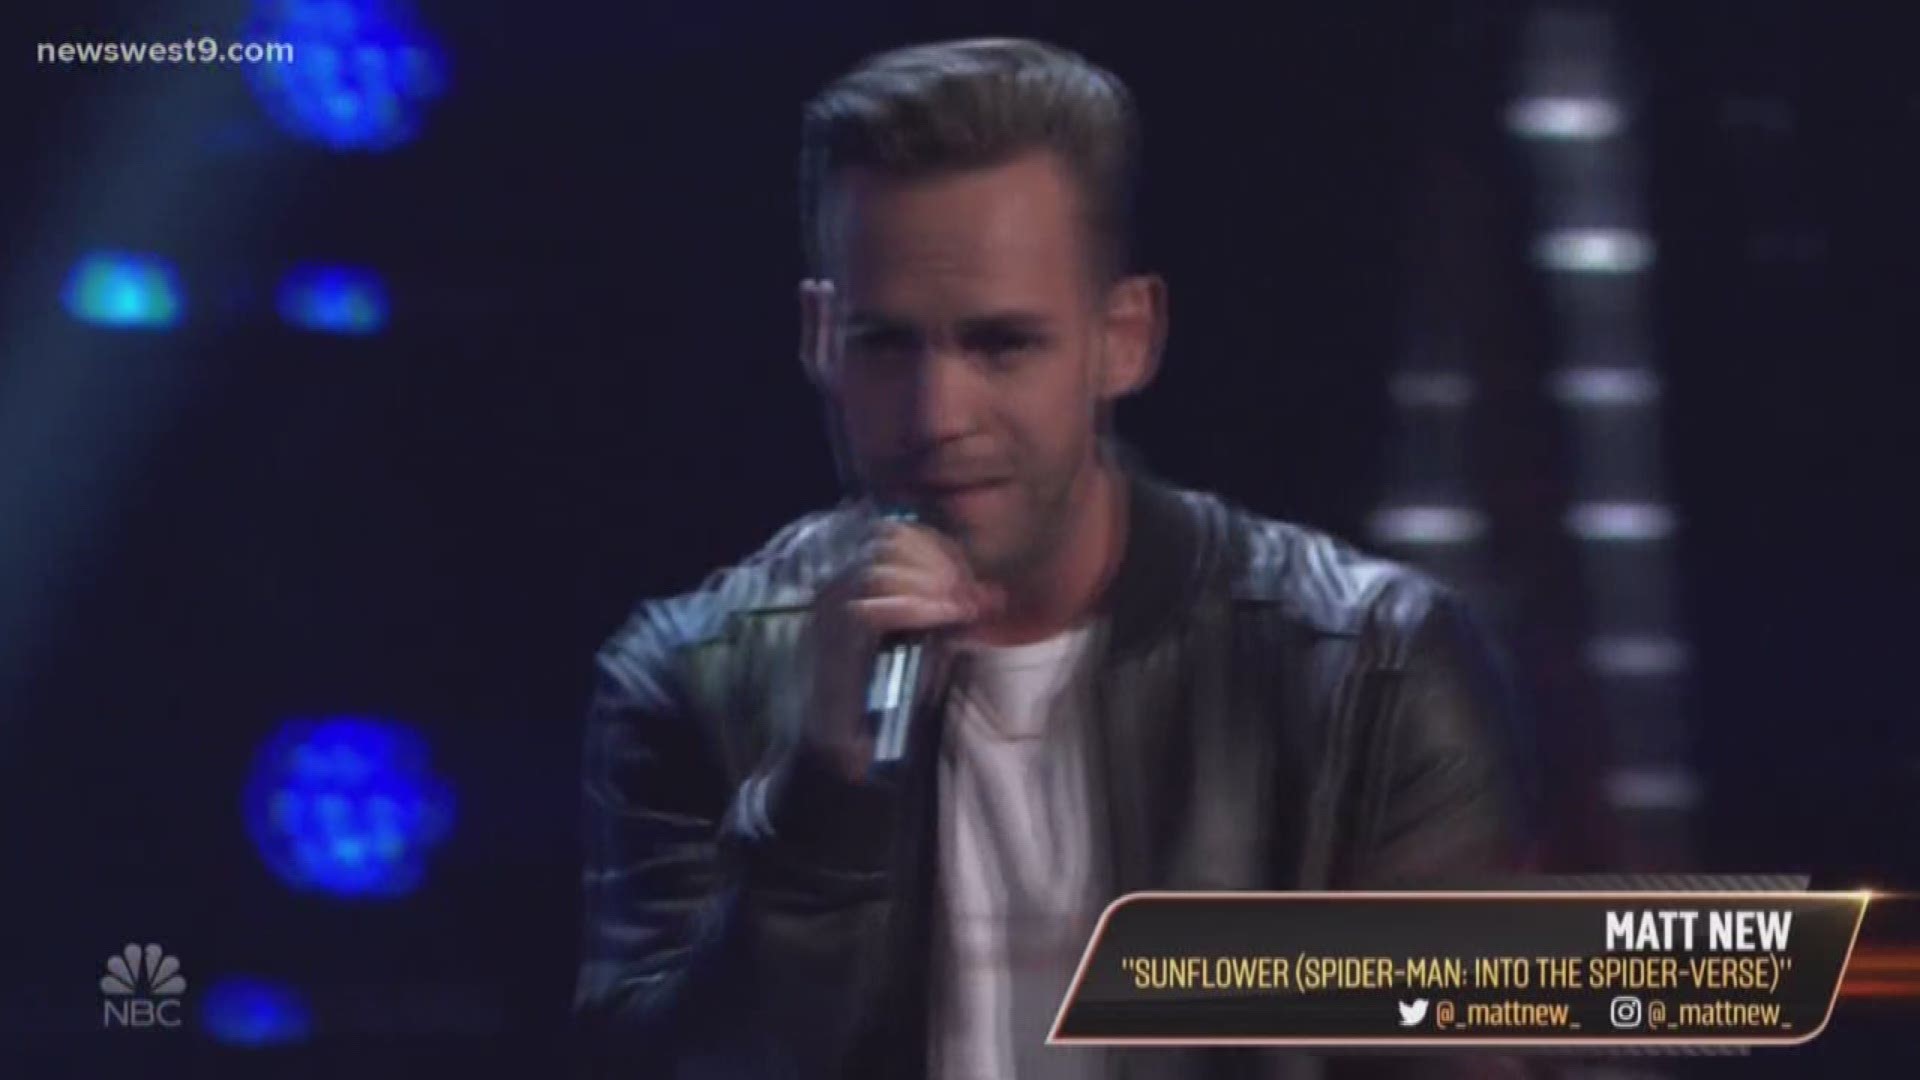 Matt New made major waves during his performance on "The Voice."